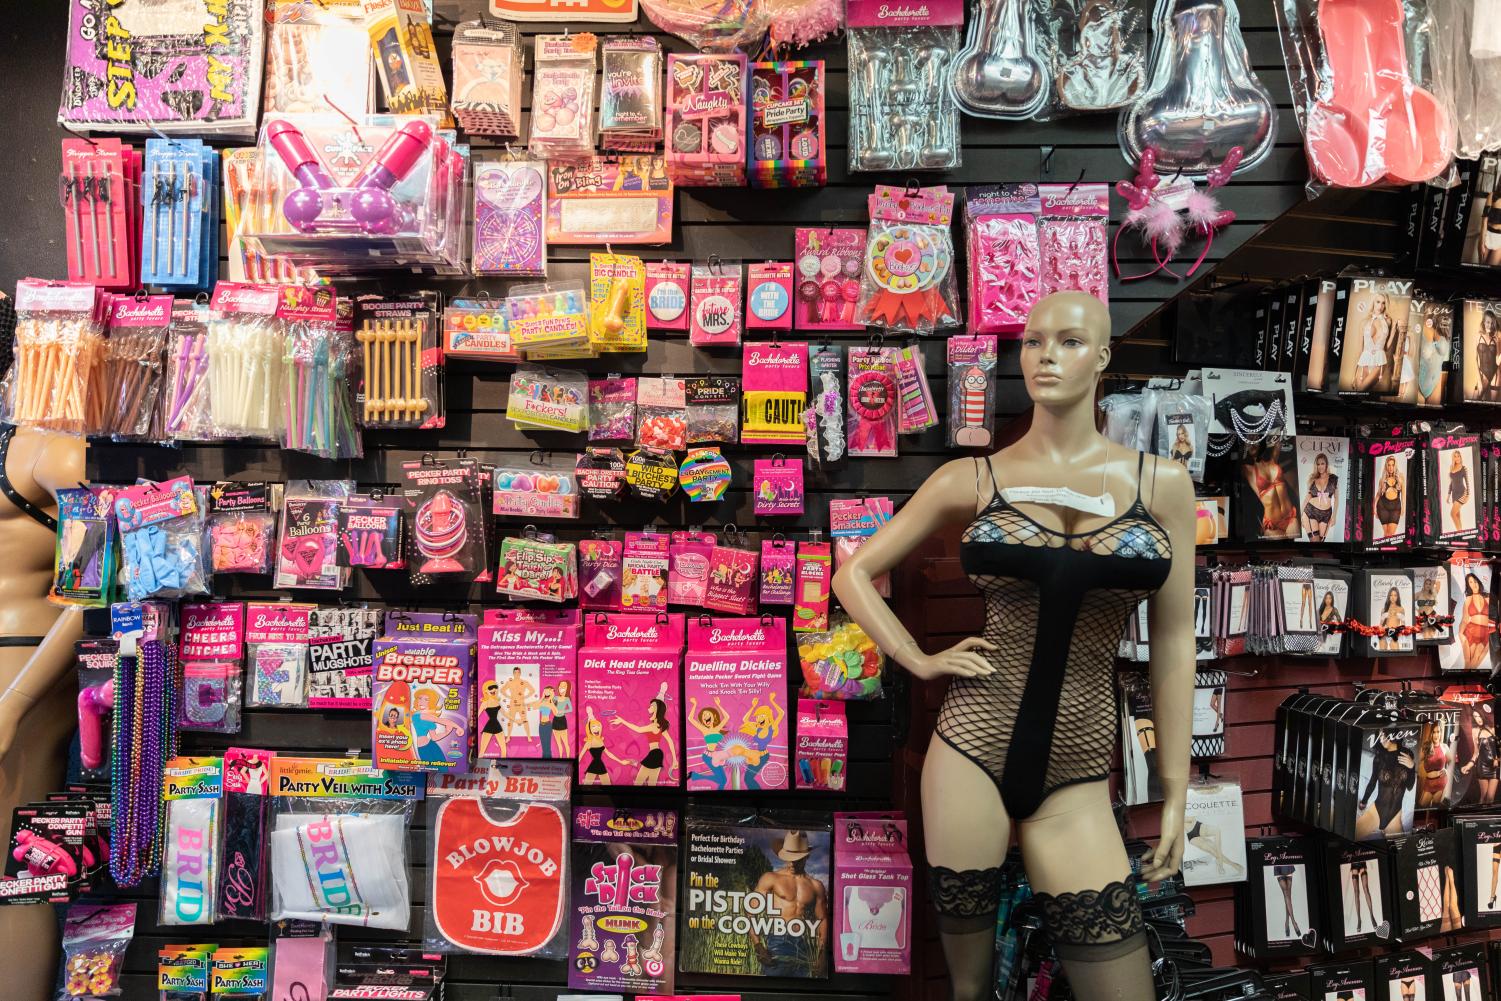 Sex toy inclusivity Chicago sex toy stores provide resources for LGBTQ+ community photo